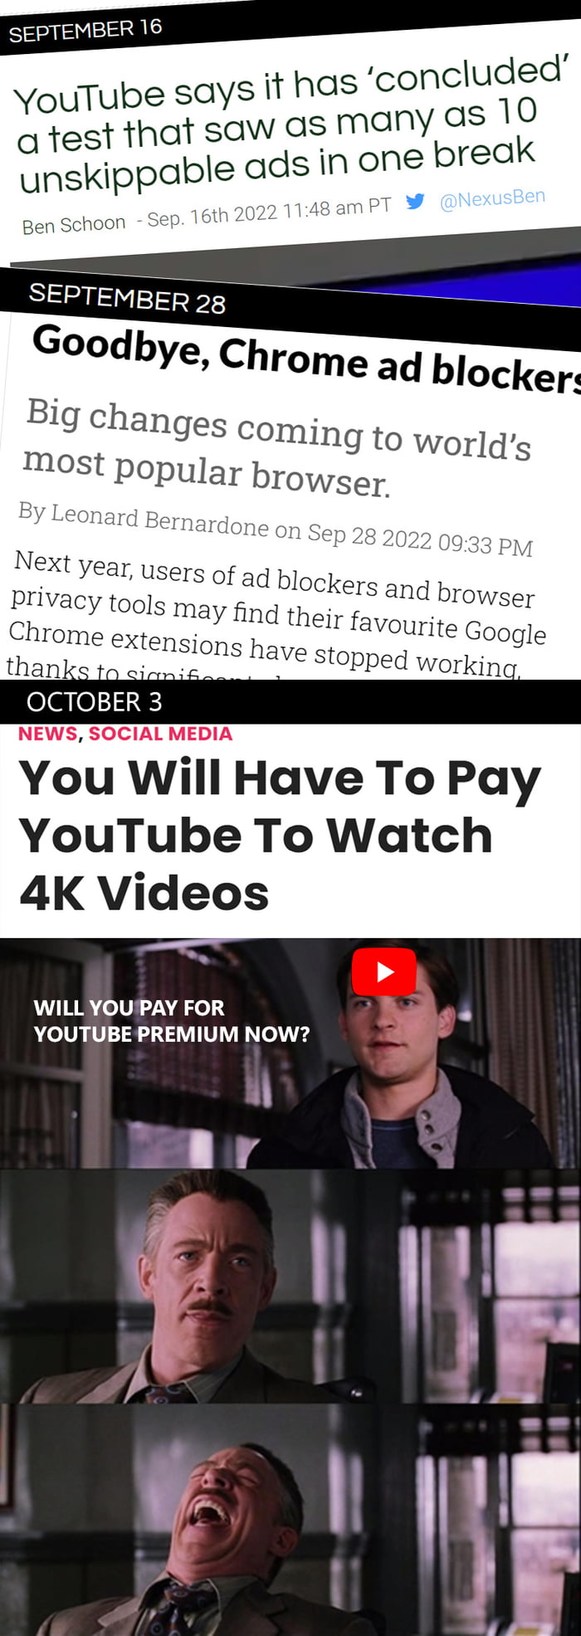 YouTube really trying hard to grab your money - meme